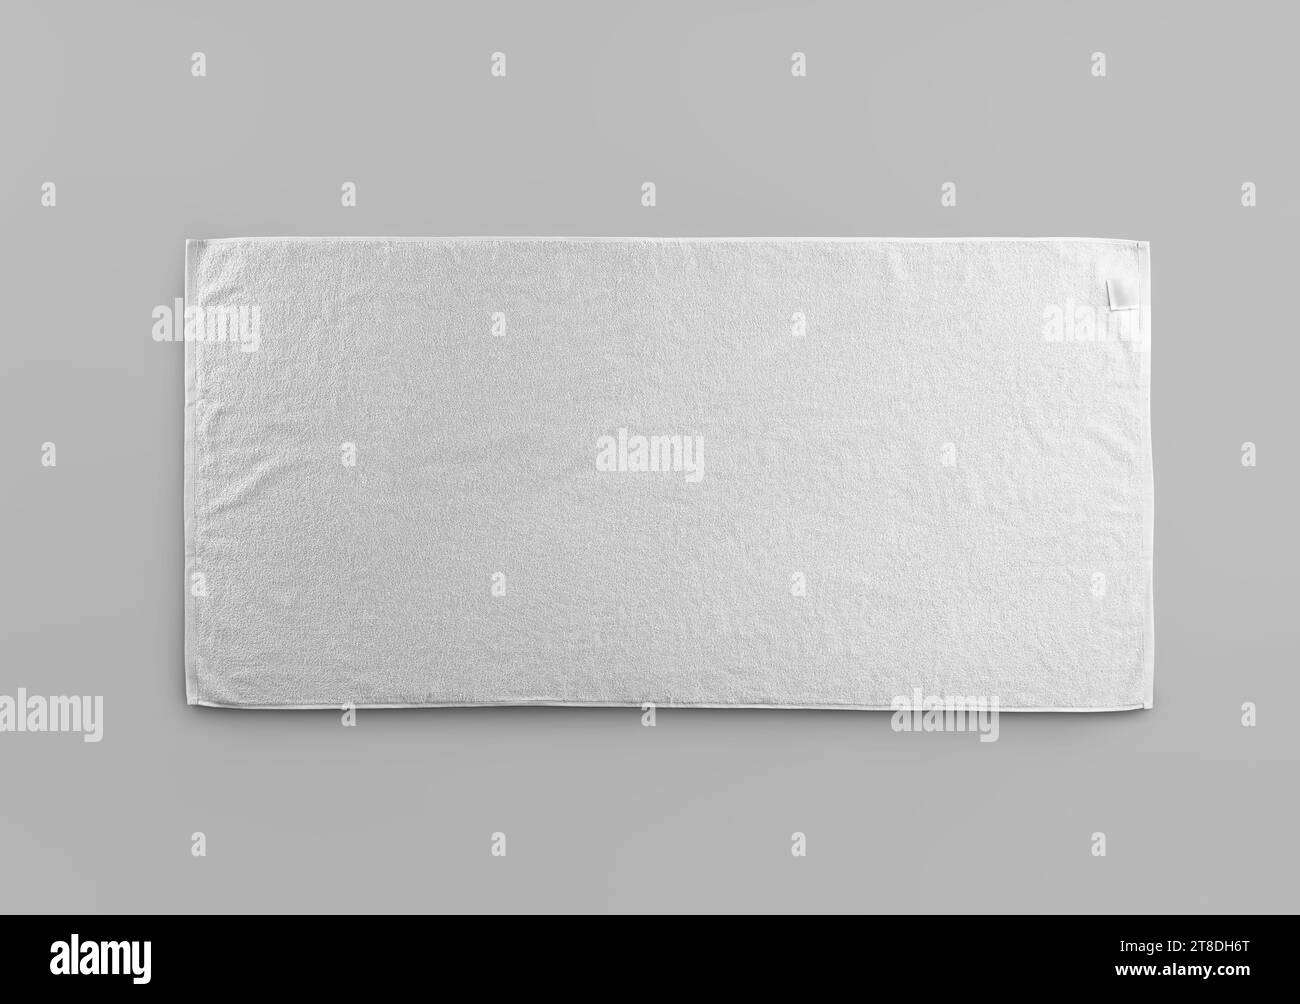 Mockup of white terry towel with label isolated on background. Fashionable laid out towelling template for wiping, for branding, design. Product photo Stock Photo